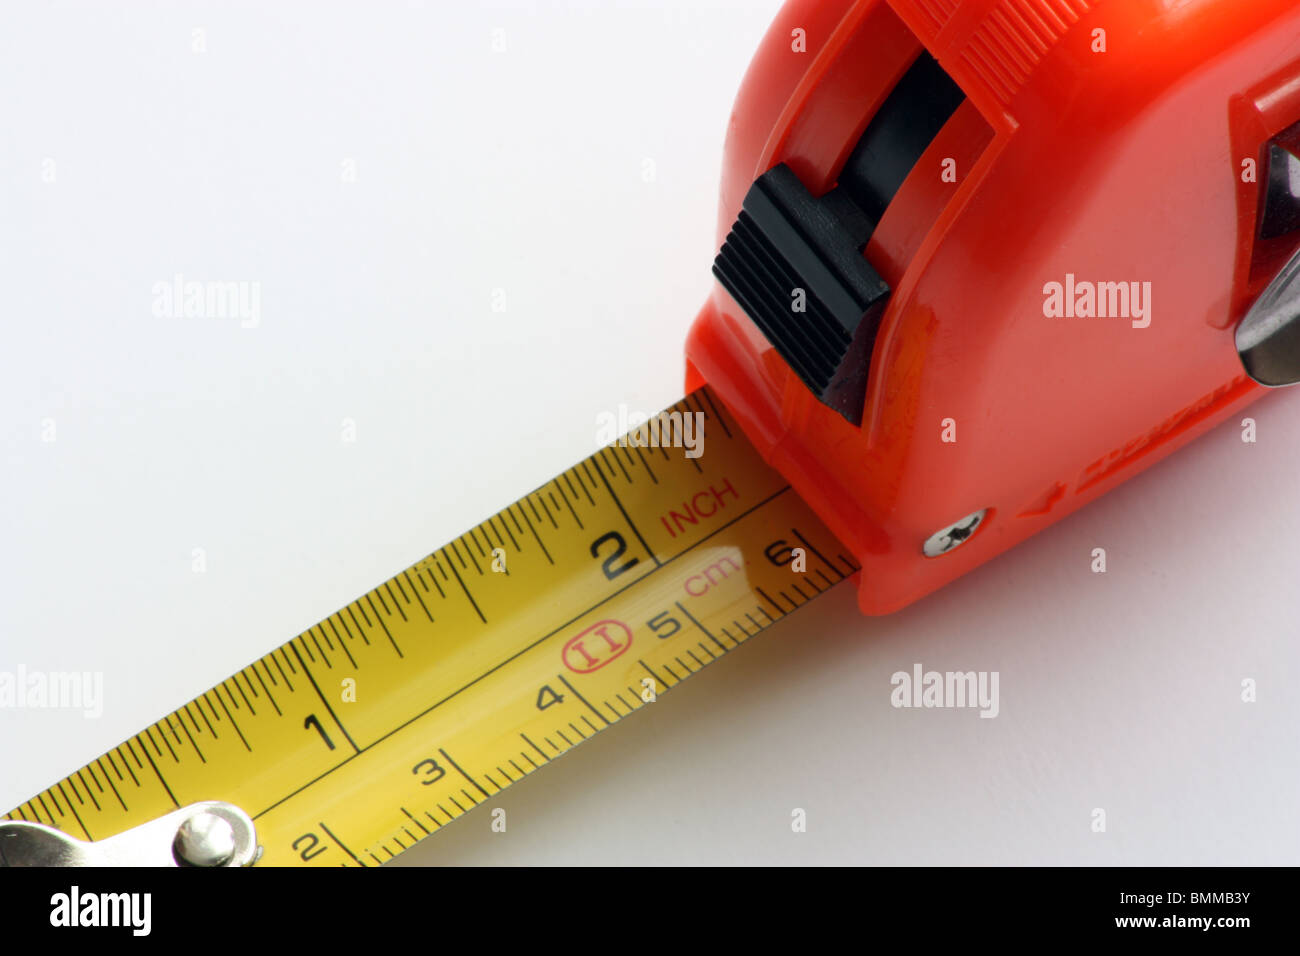 https://c8.alamy.com/comp/BMMB3Y/a-tape-measure-showing-a-length-of-around-2-inches-BMMB3Y.jpg